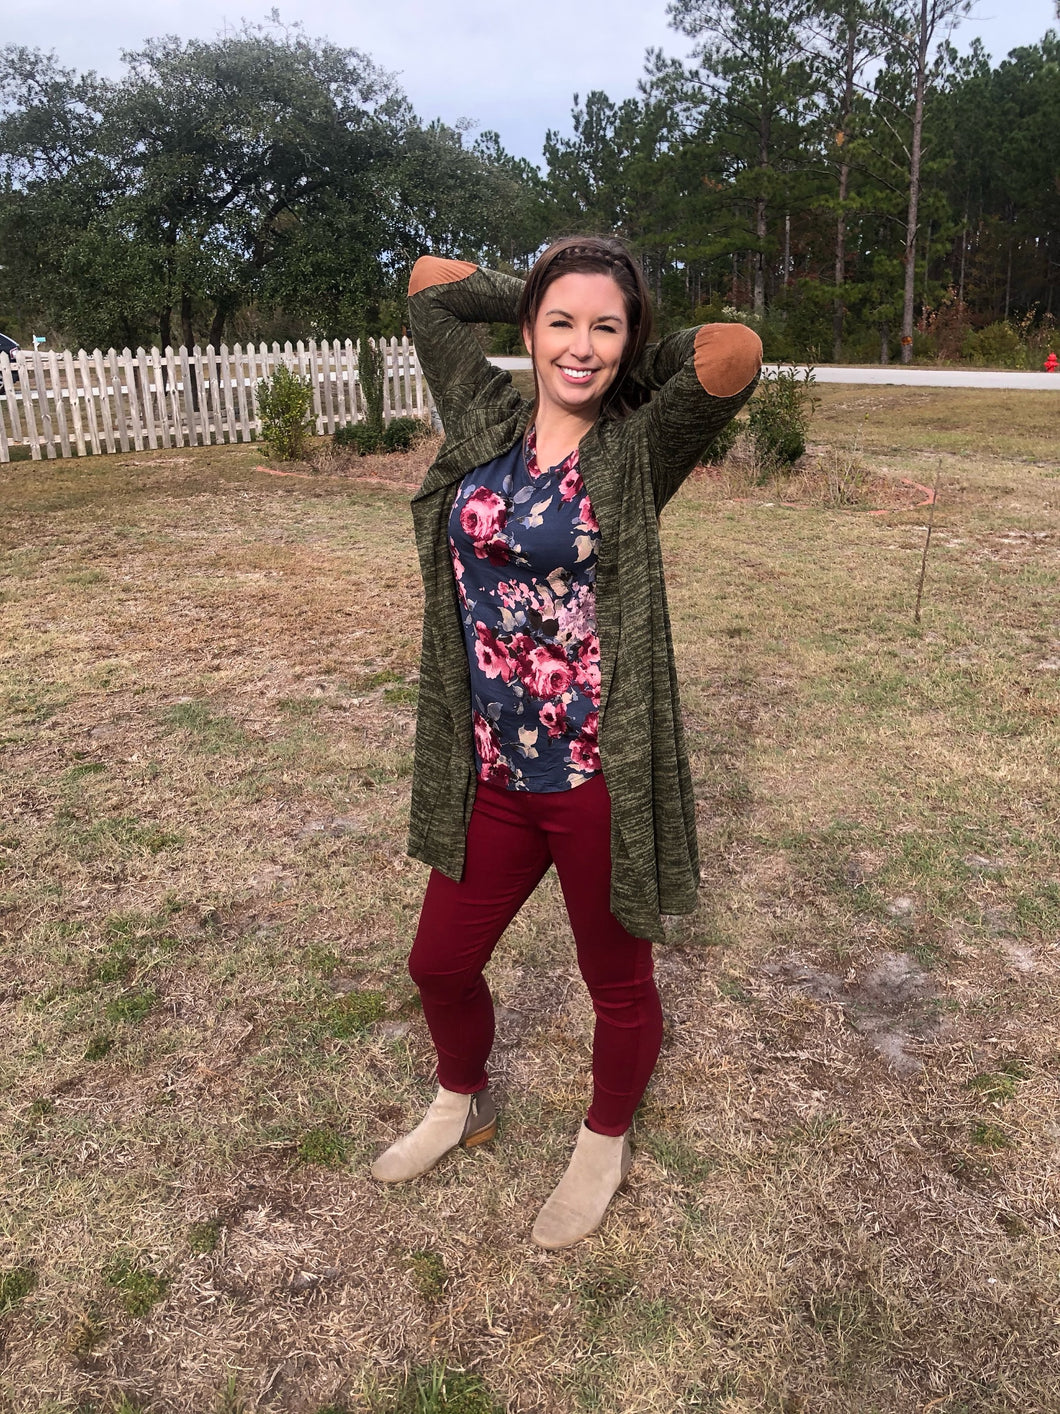 Long sleeve, past the knee in length, olive army green heathered look cardigan with faux brown suede elbow patches. Soft and cozy perfect for layering 